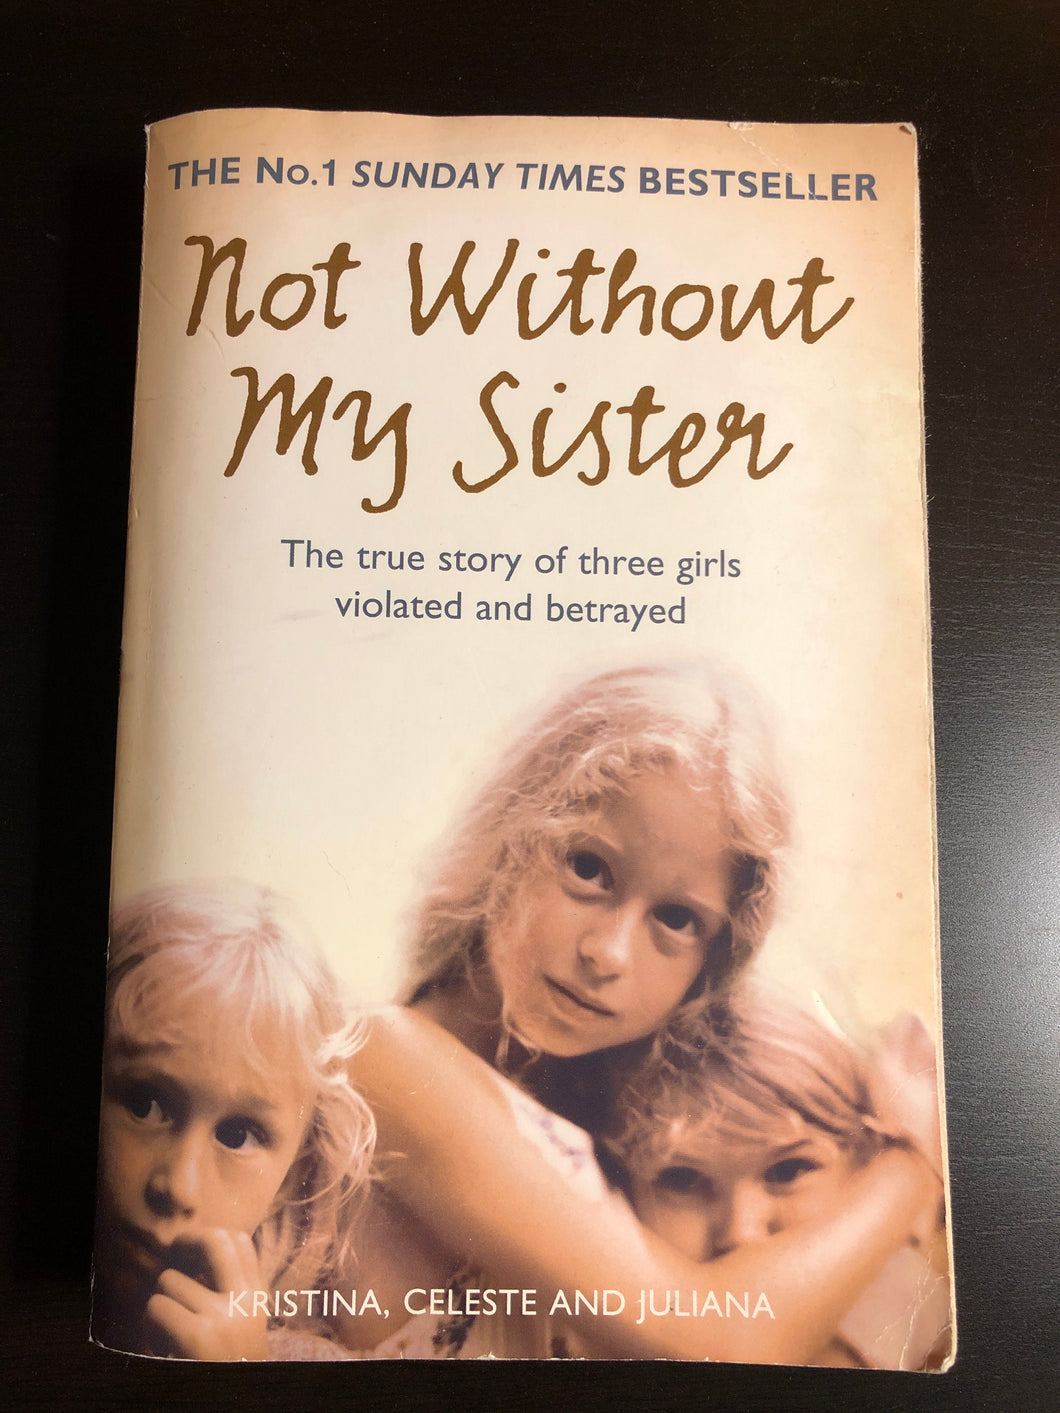 Not Without My Sister: The true story of three girls violated and betrayed